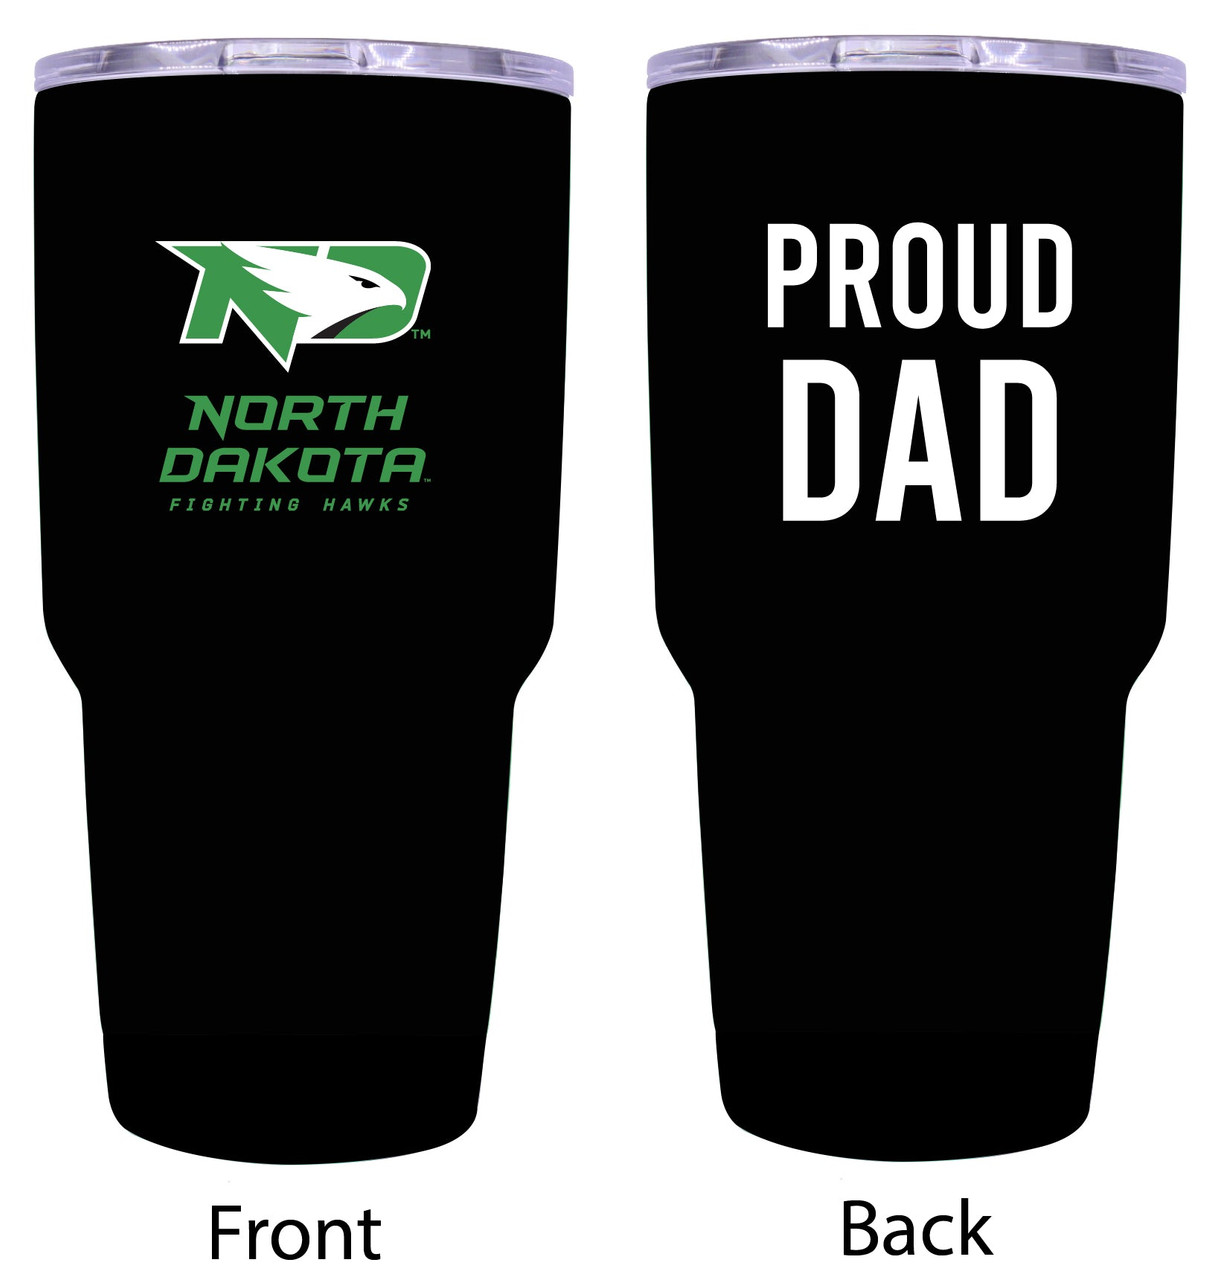 North Dakota Fighting Hawks Proud Dad 24 oz Insulated Stainless Steel Tumblers Choose Your Color.